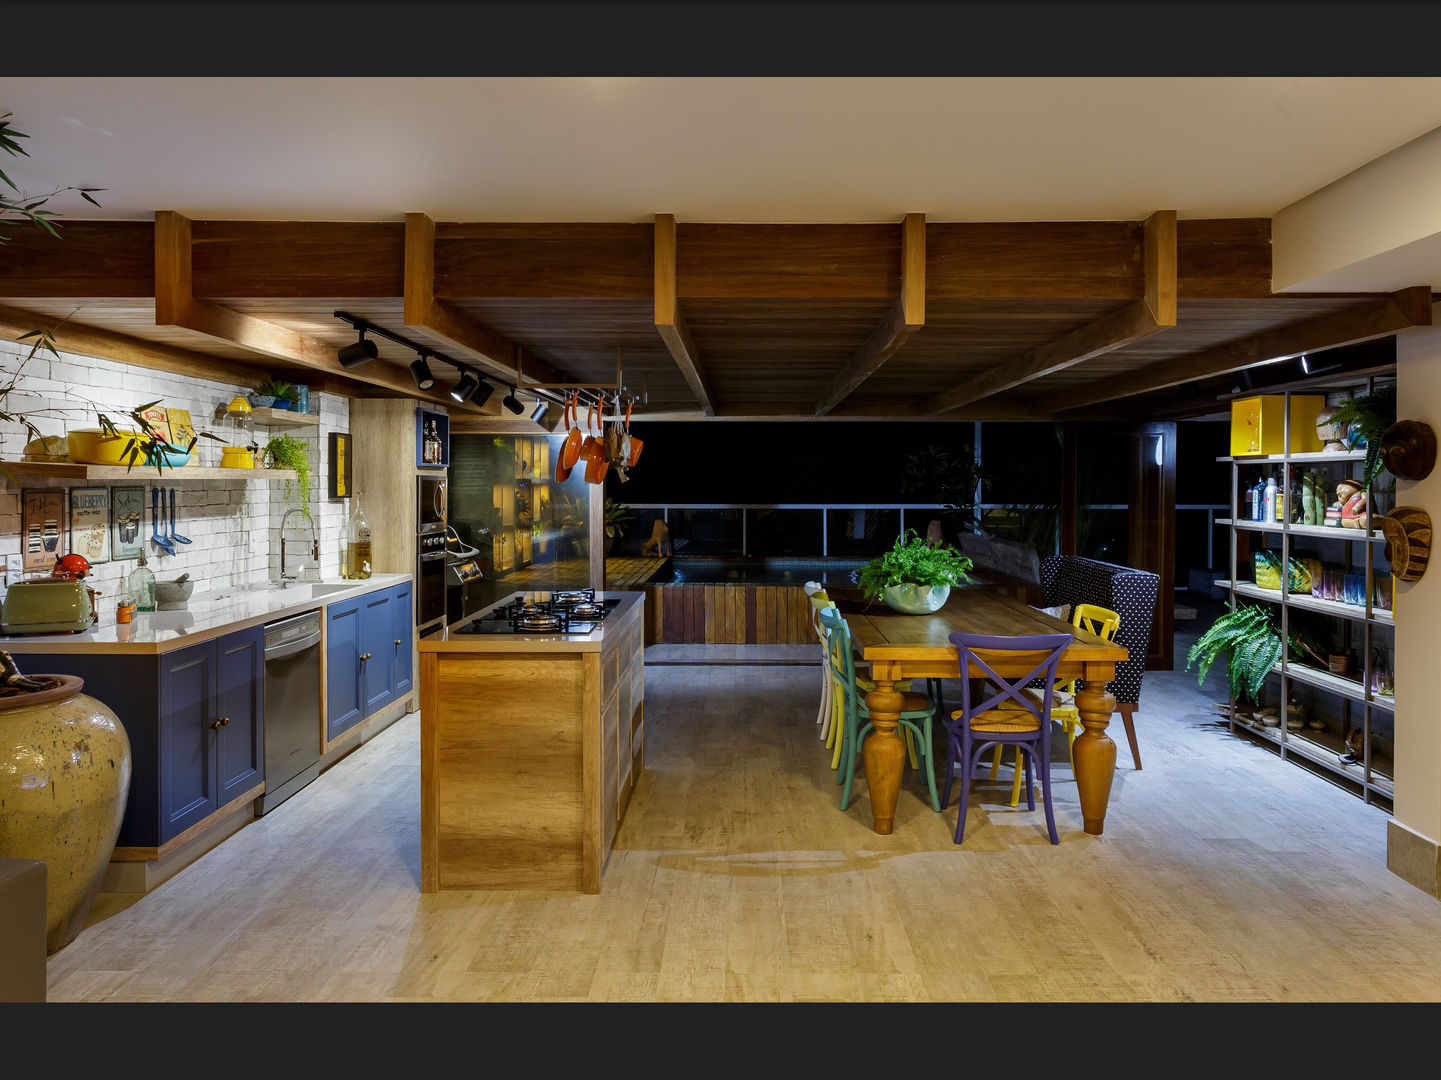 homify Tropical style kitchen